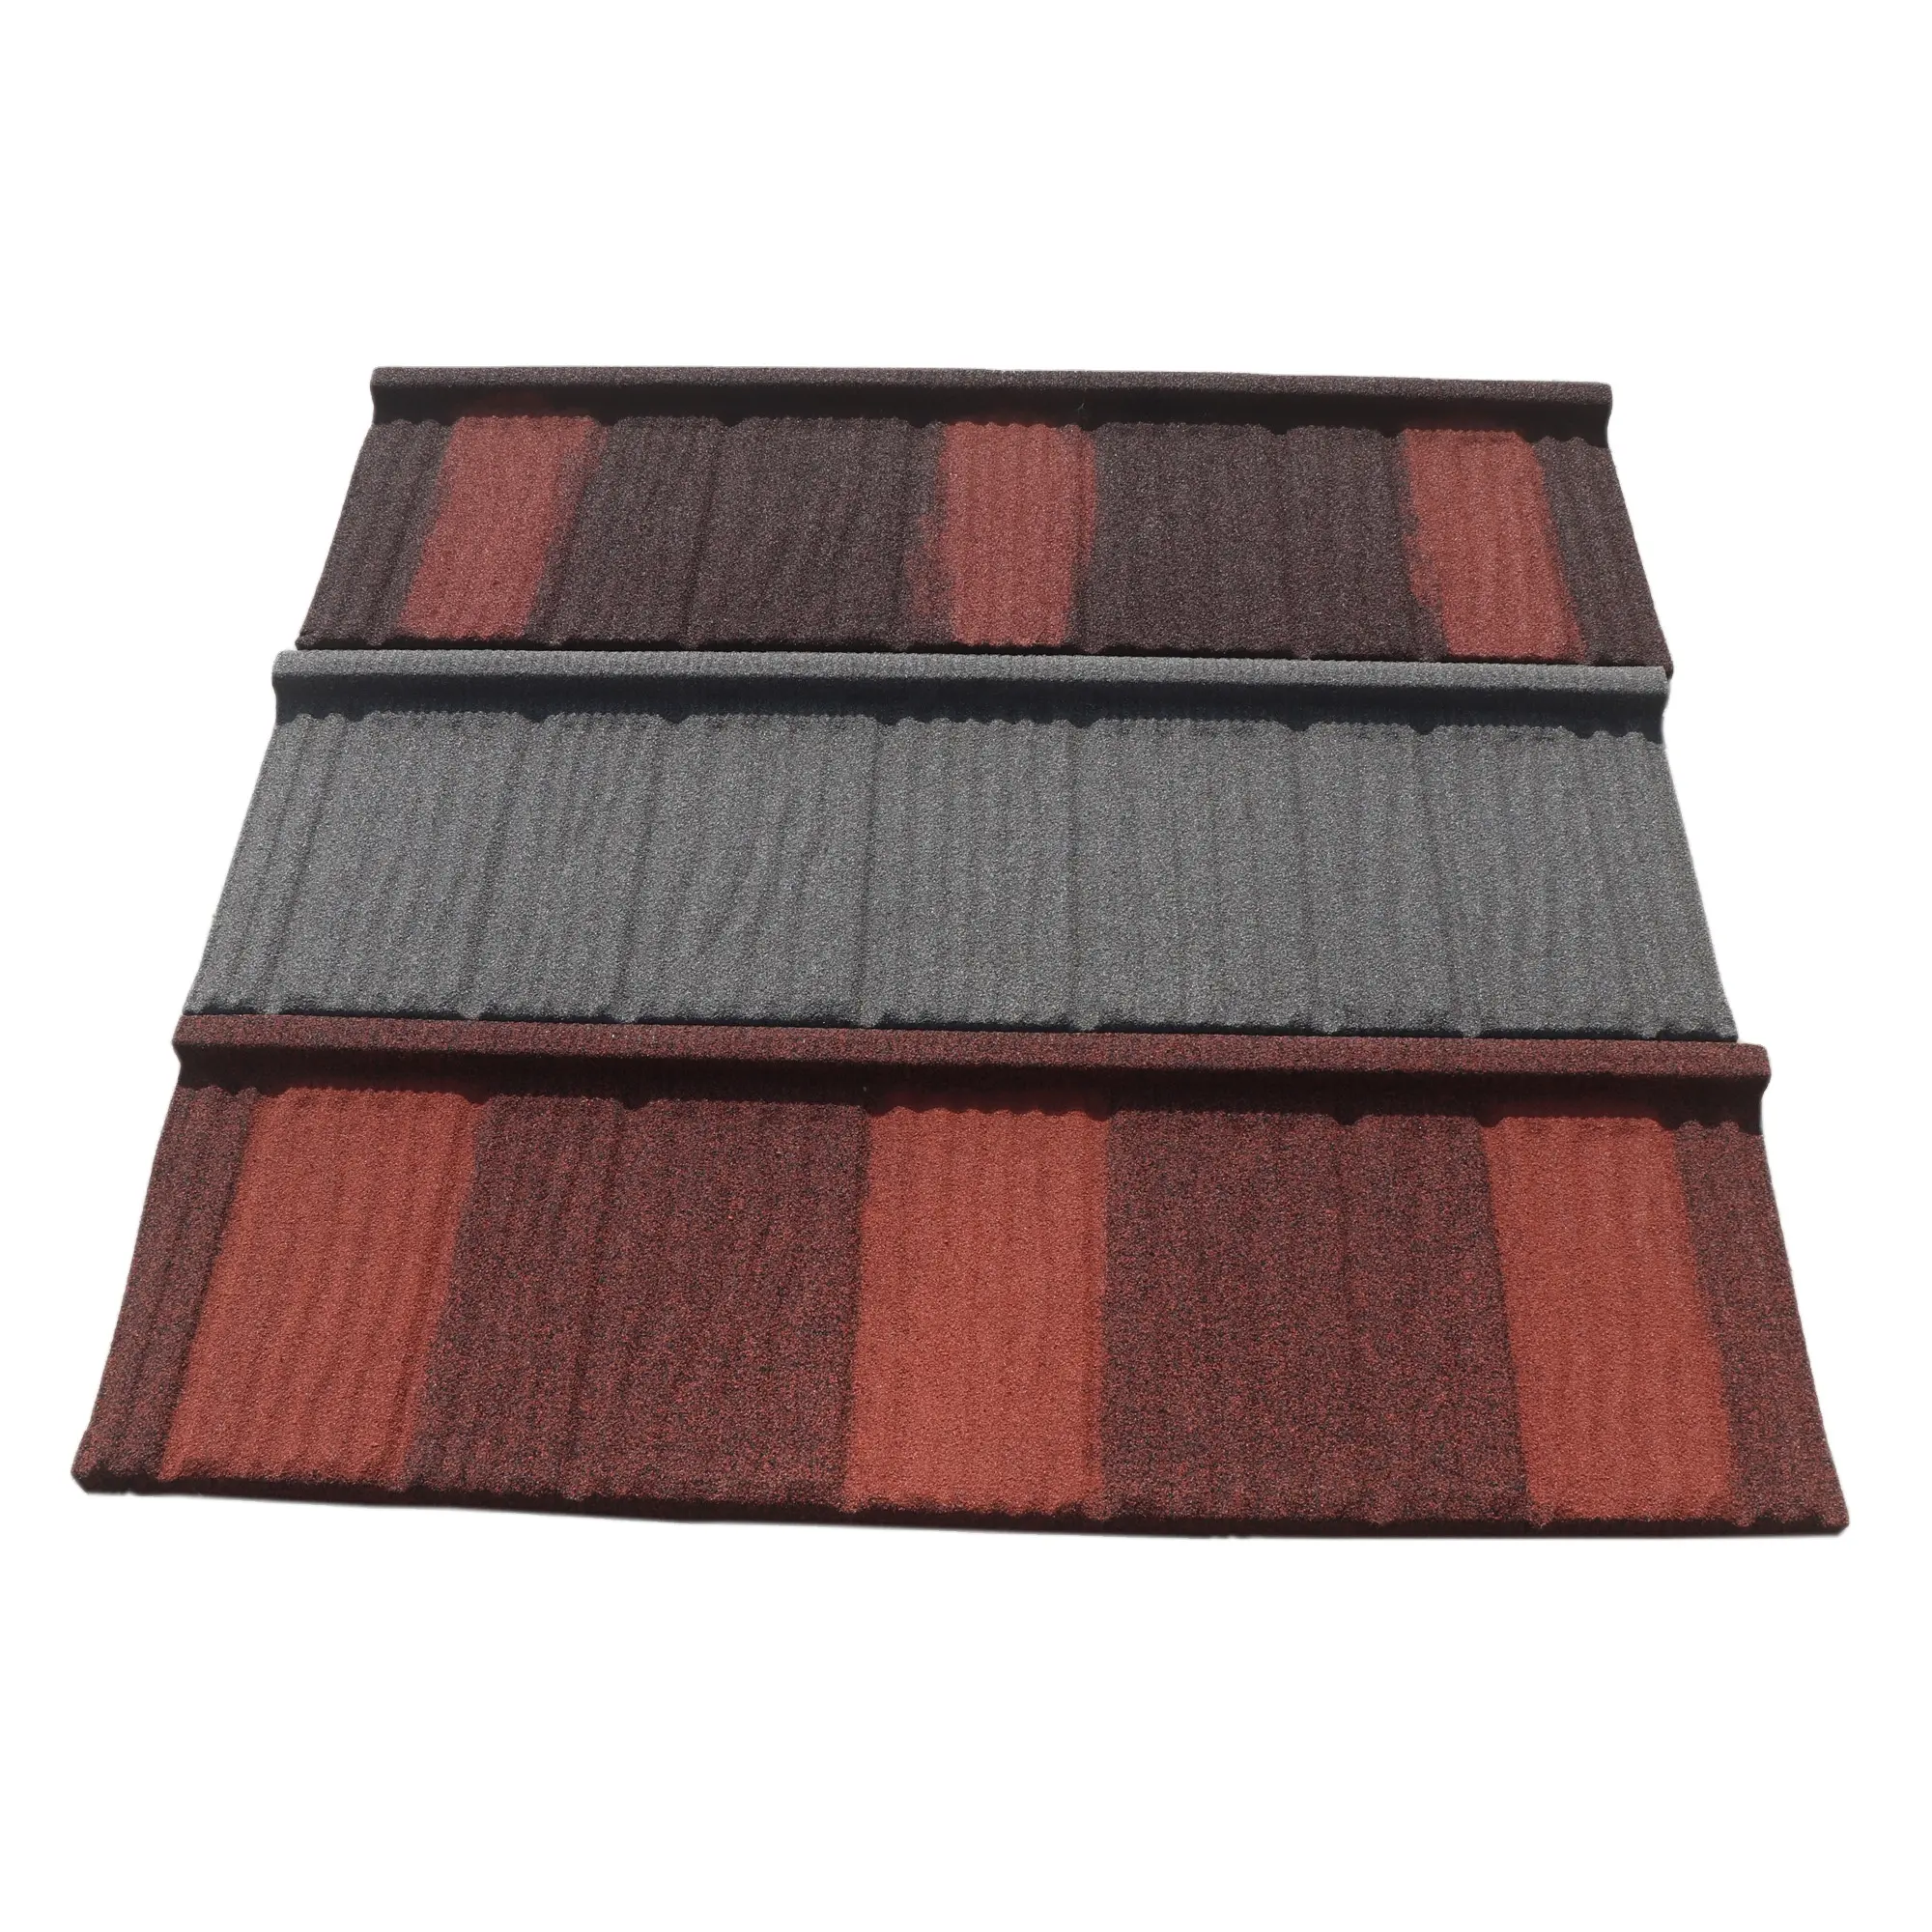 Hot sale Villa sand coated metal roofing sheets price/ type of Philippines roof tiles/cheap roofing shingles